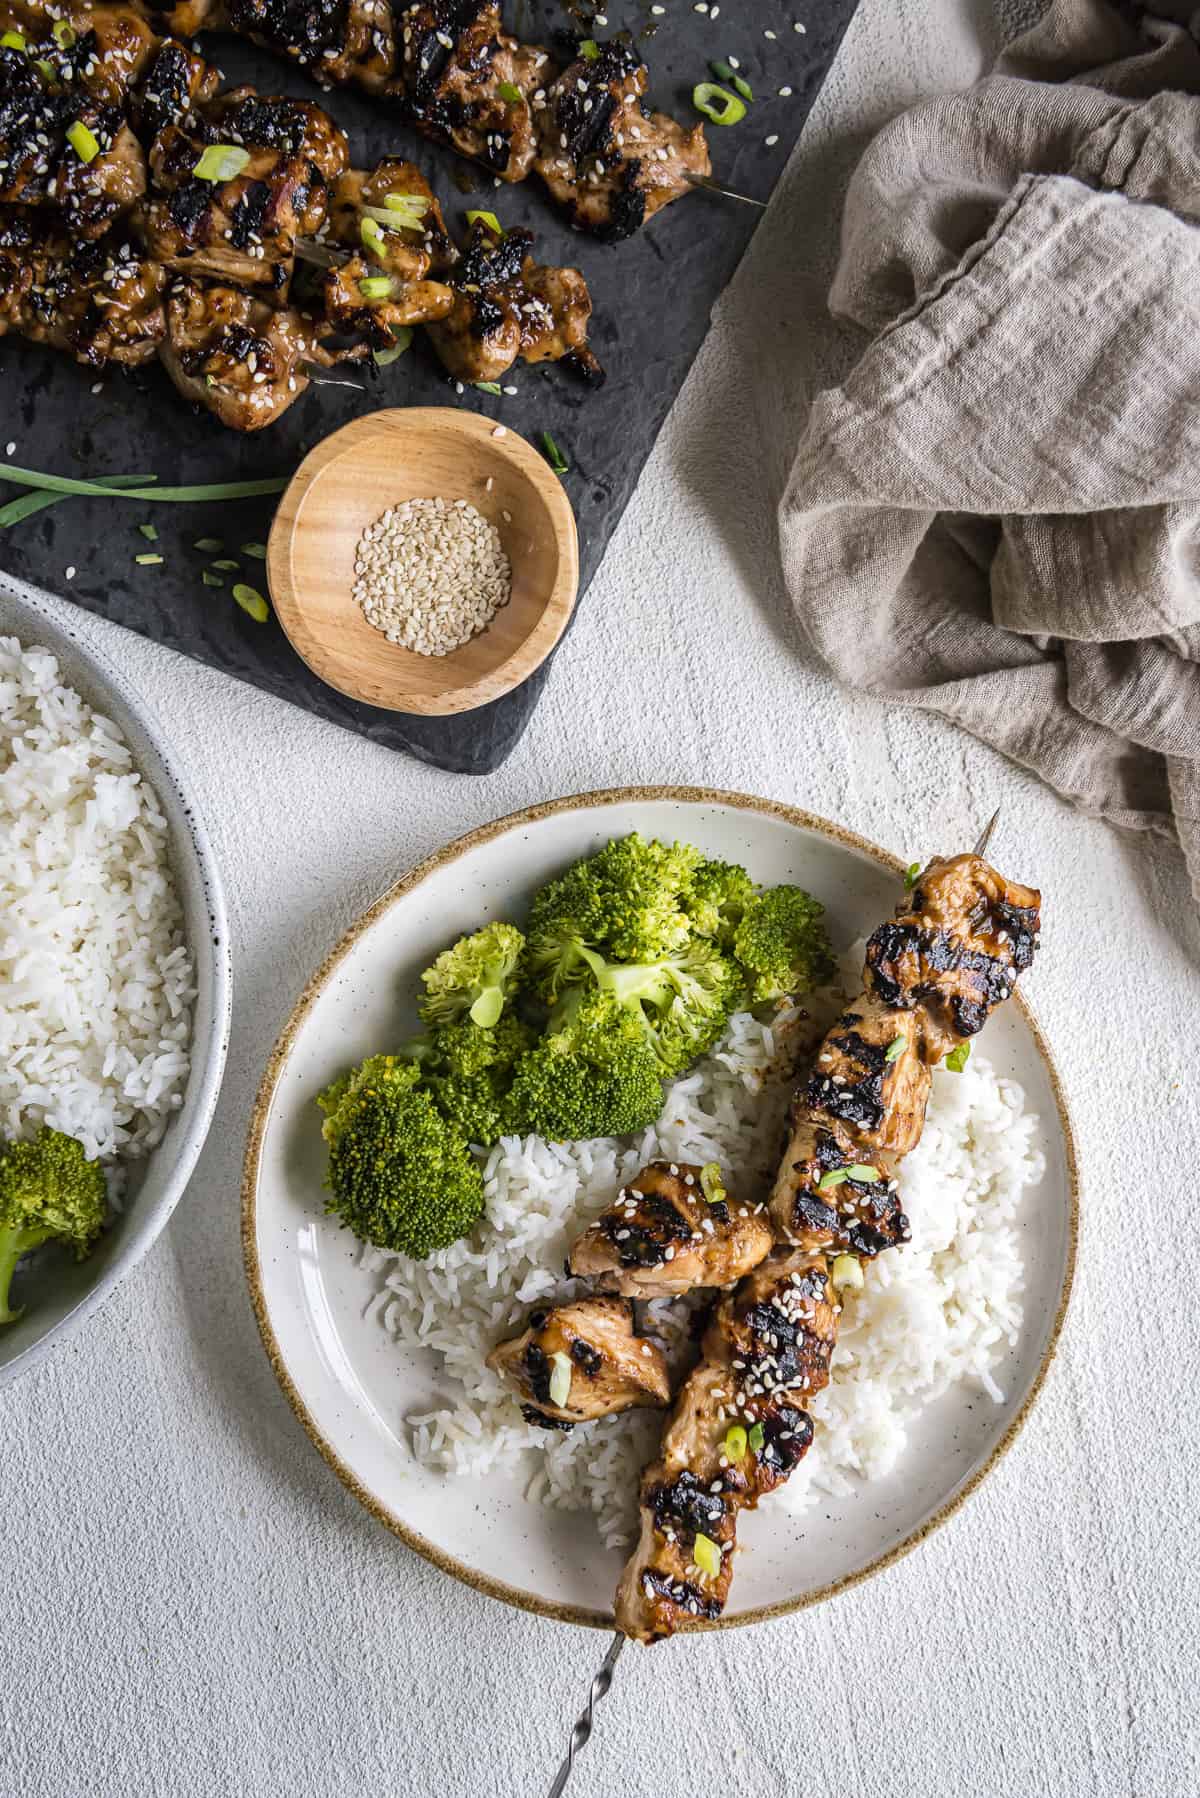 a grilled teriyaki chicken skewer on a plate of rice with broccoli